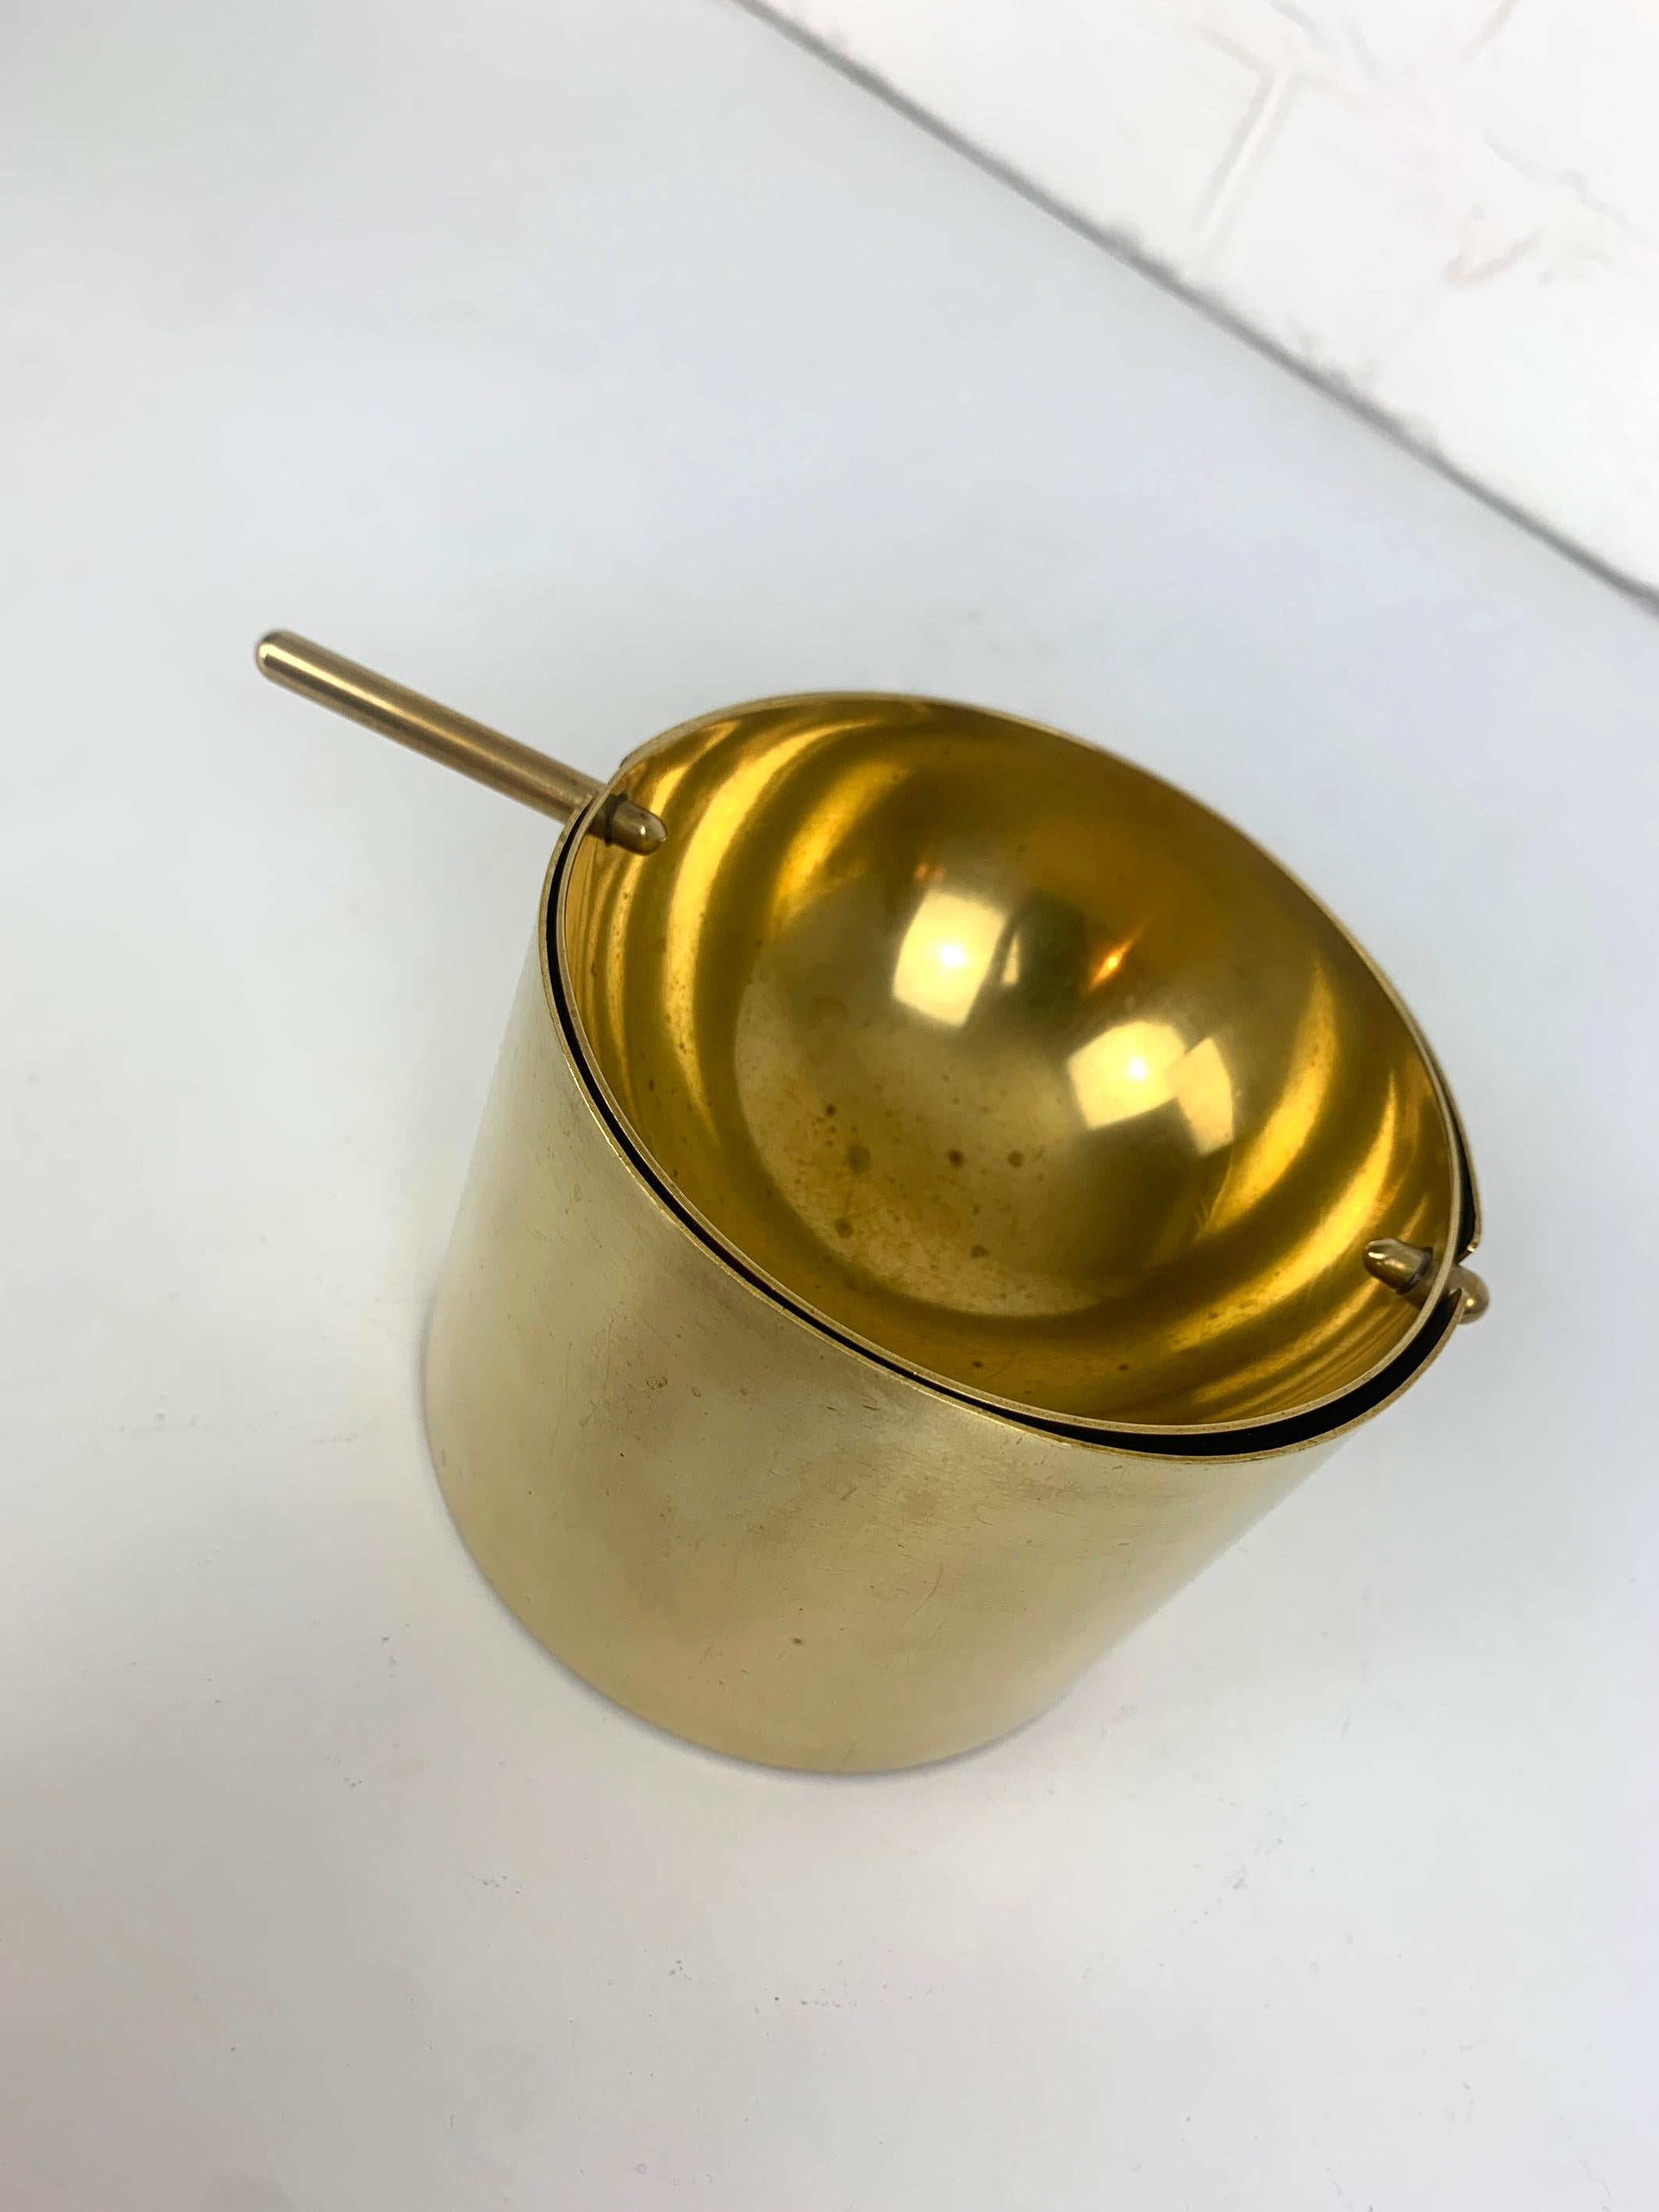 Large Brass Ashtray by Arne Jacobsen for Stelton, Cylinda-Line, 1960s For Sale 4